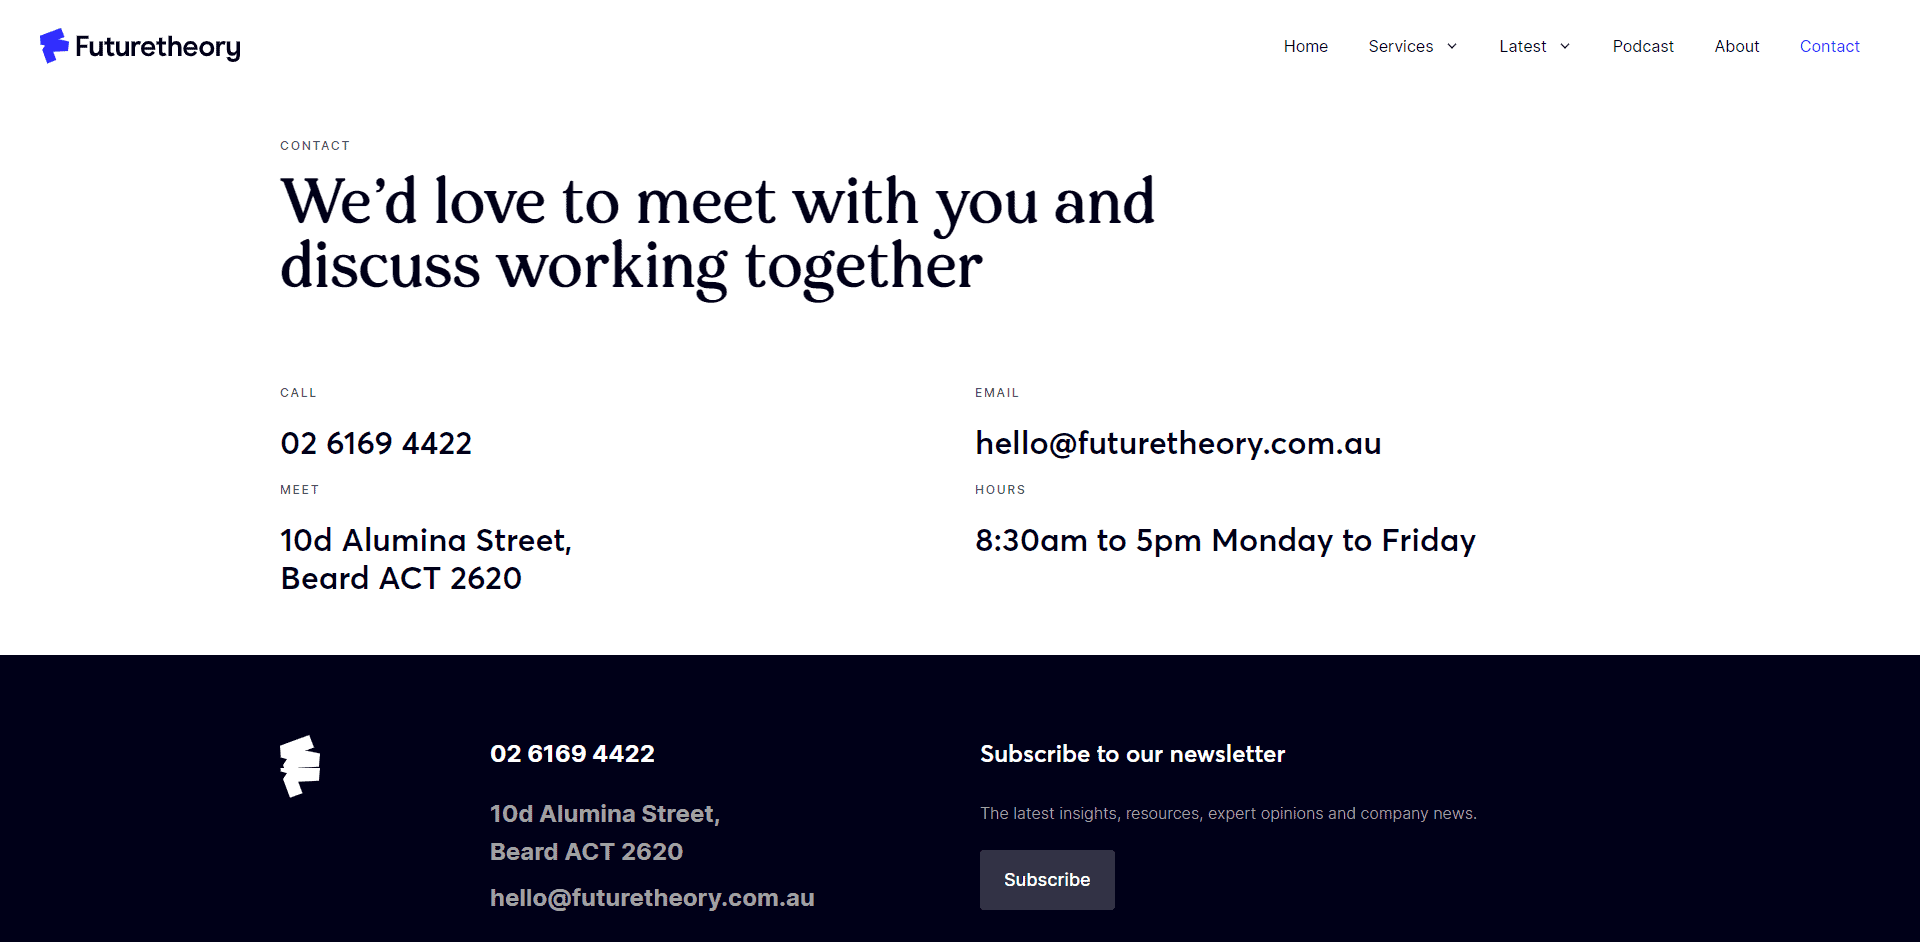 The futuretheory contact page